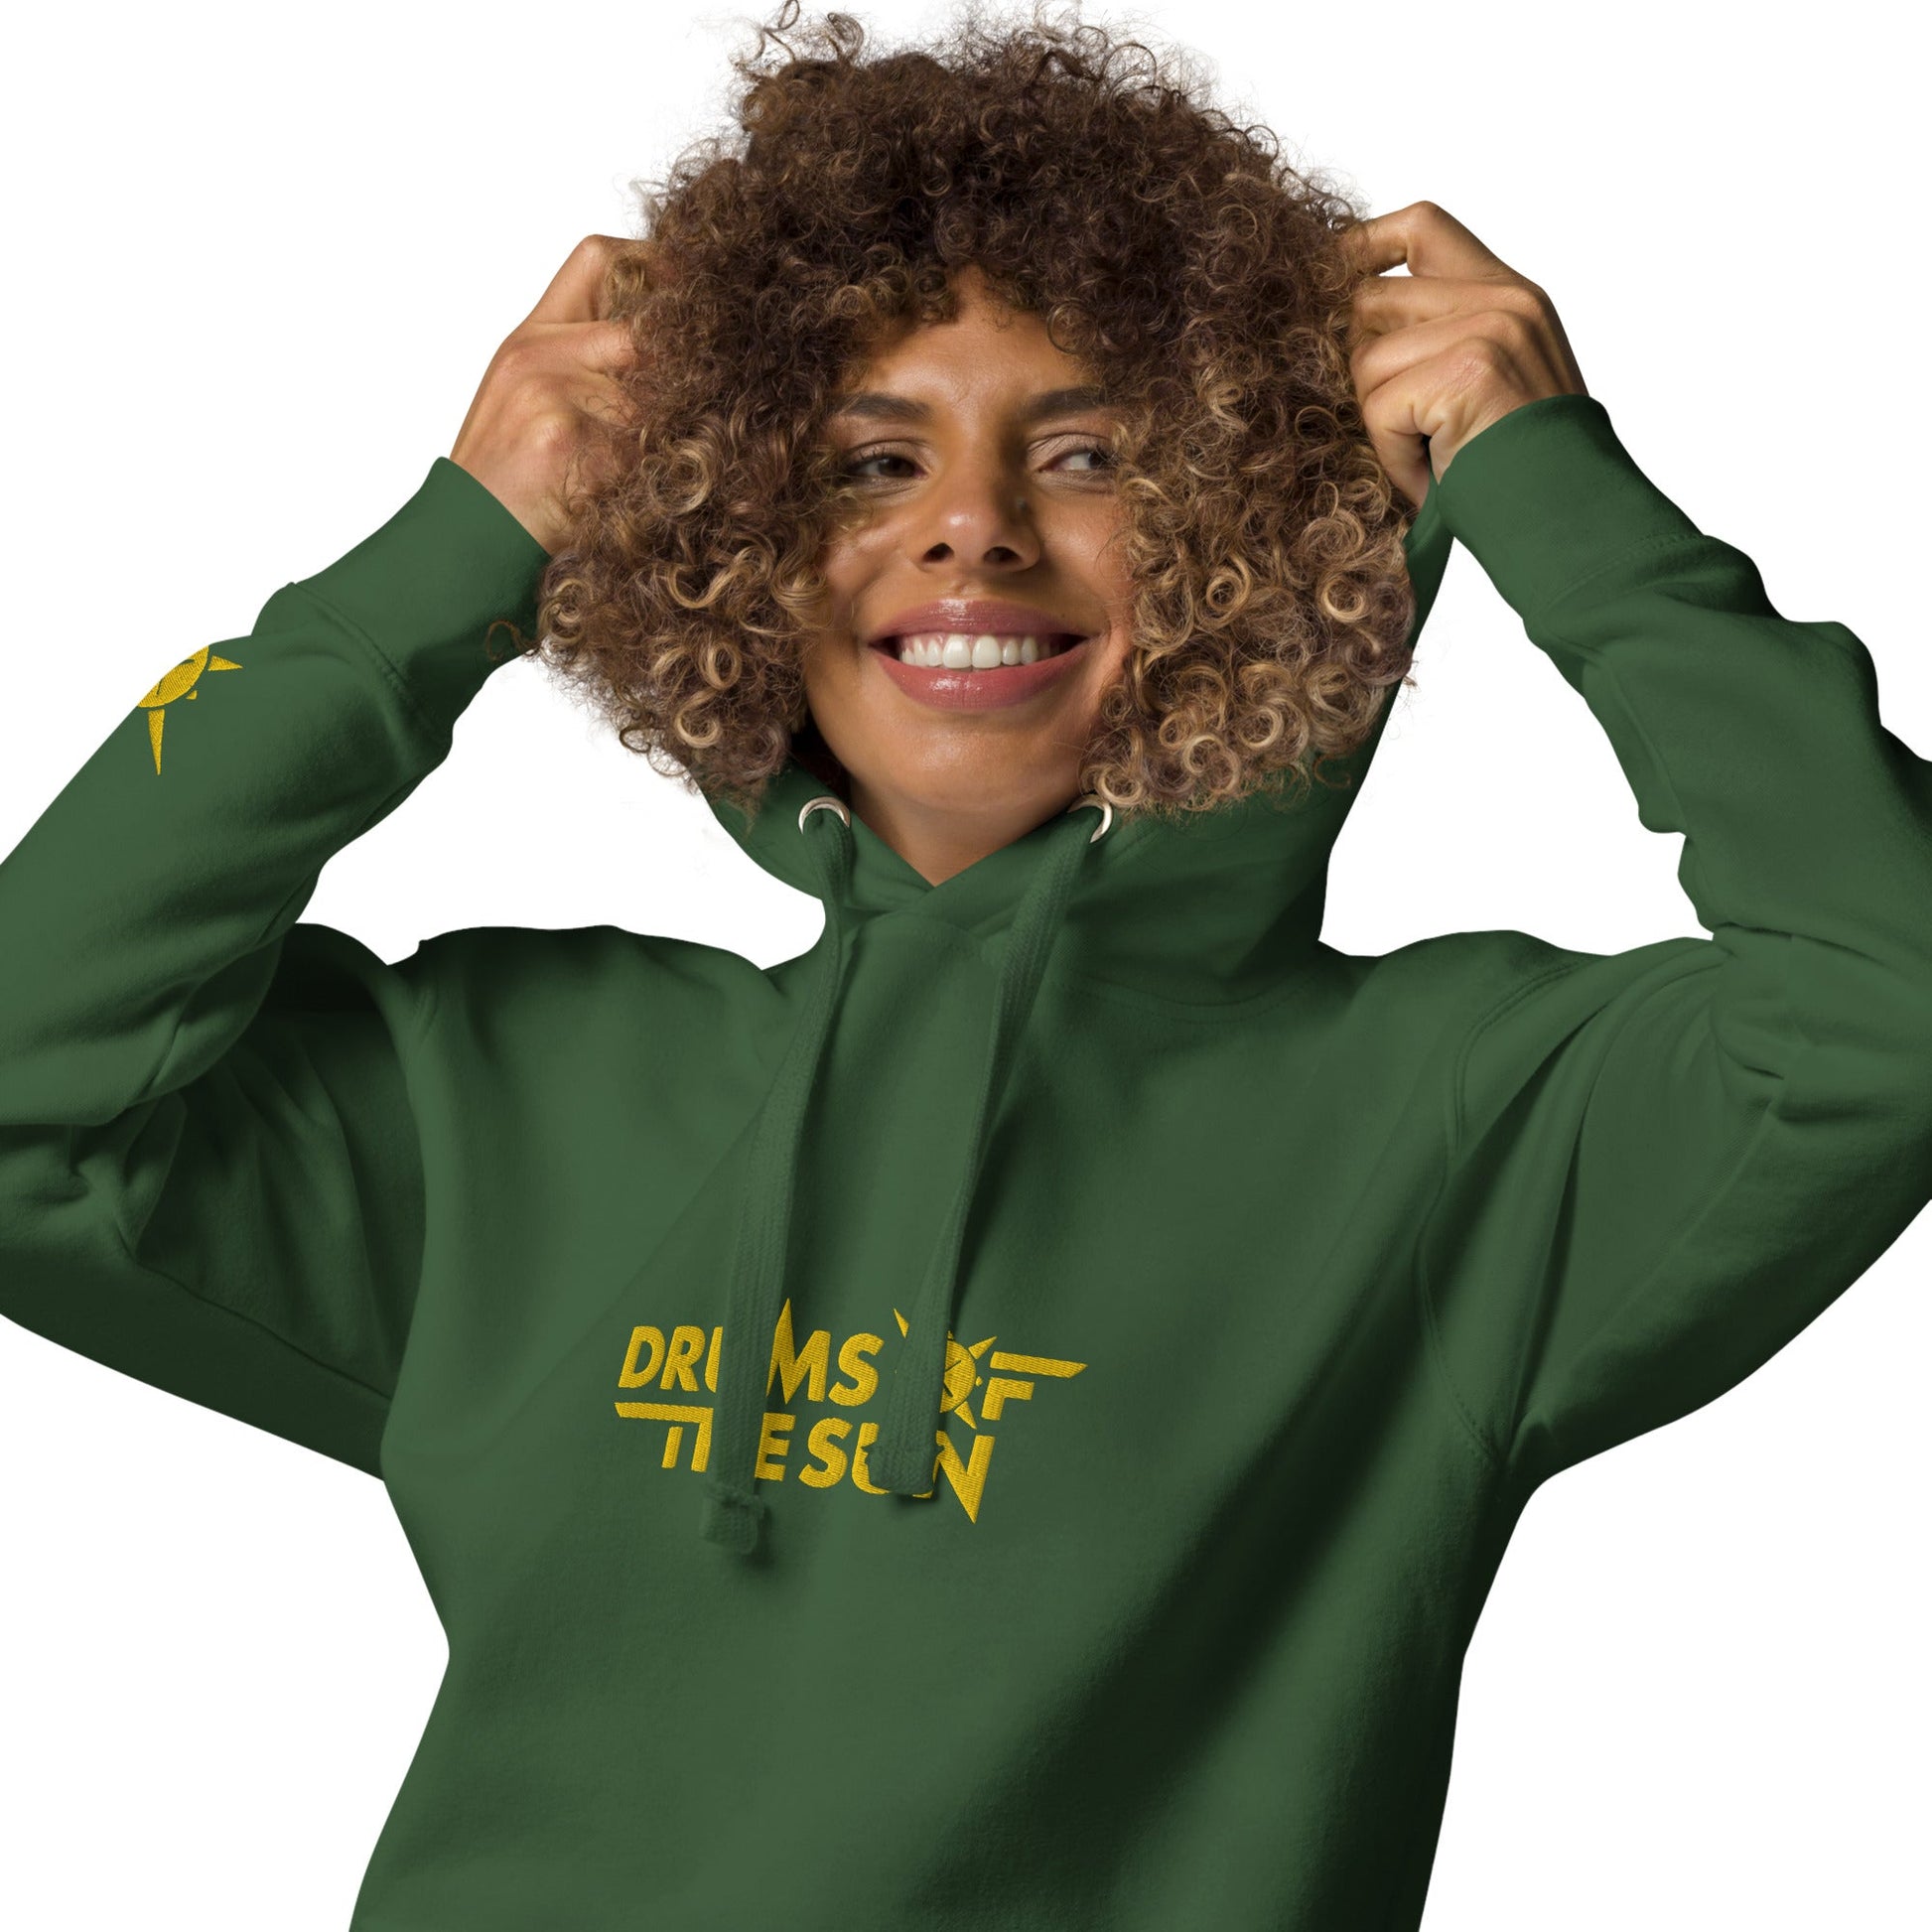 Drums of the Sun Embroidered Unisex Hoodie - BeExtra! Apparel & More